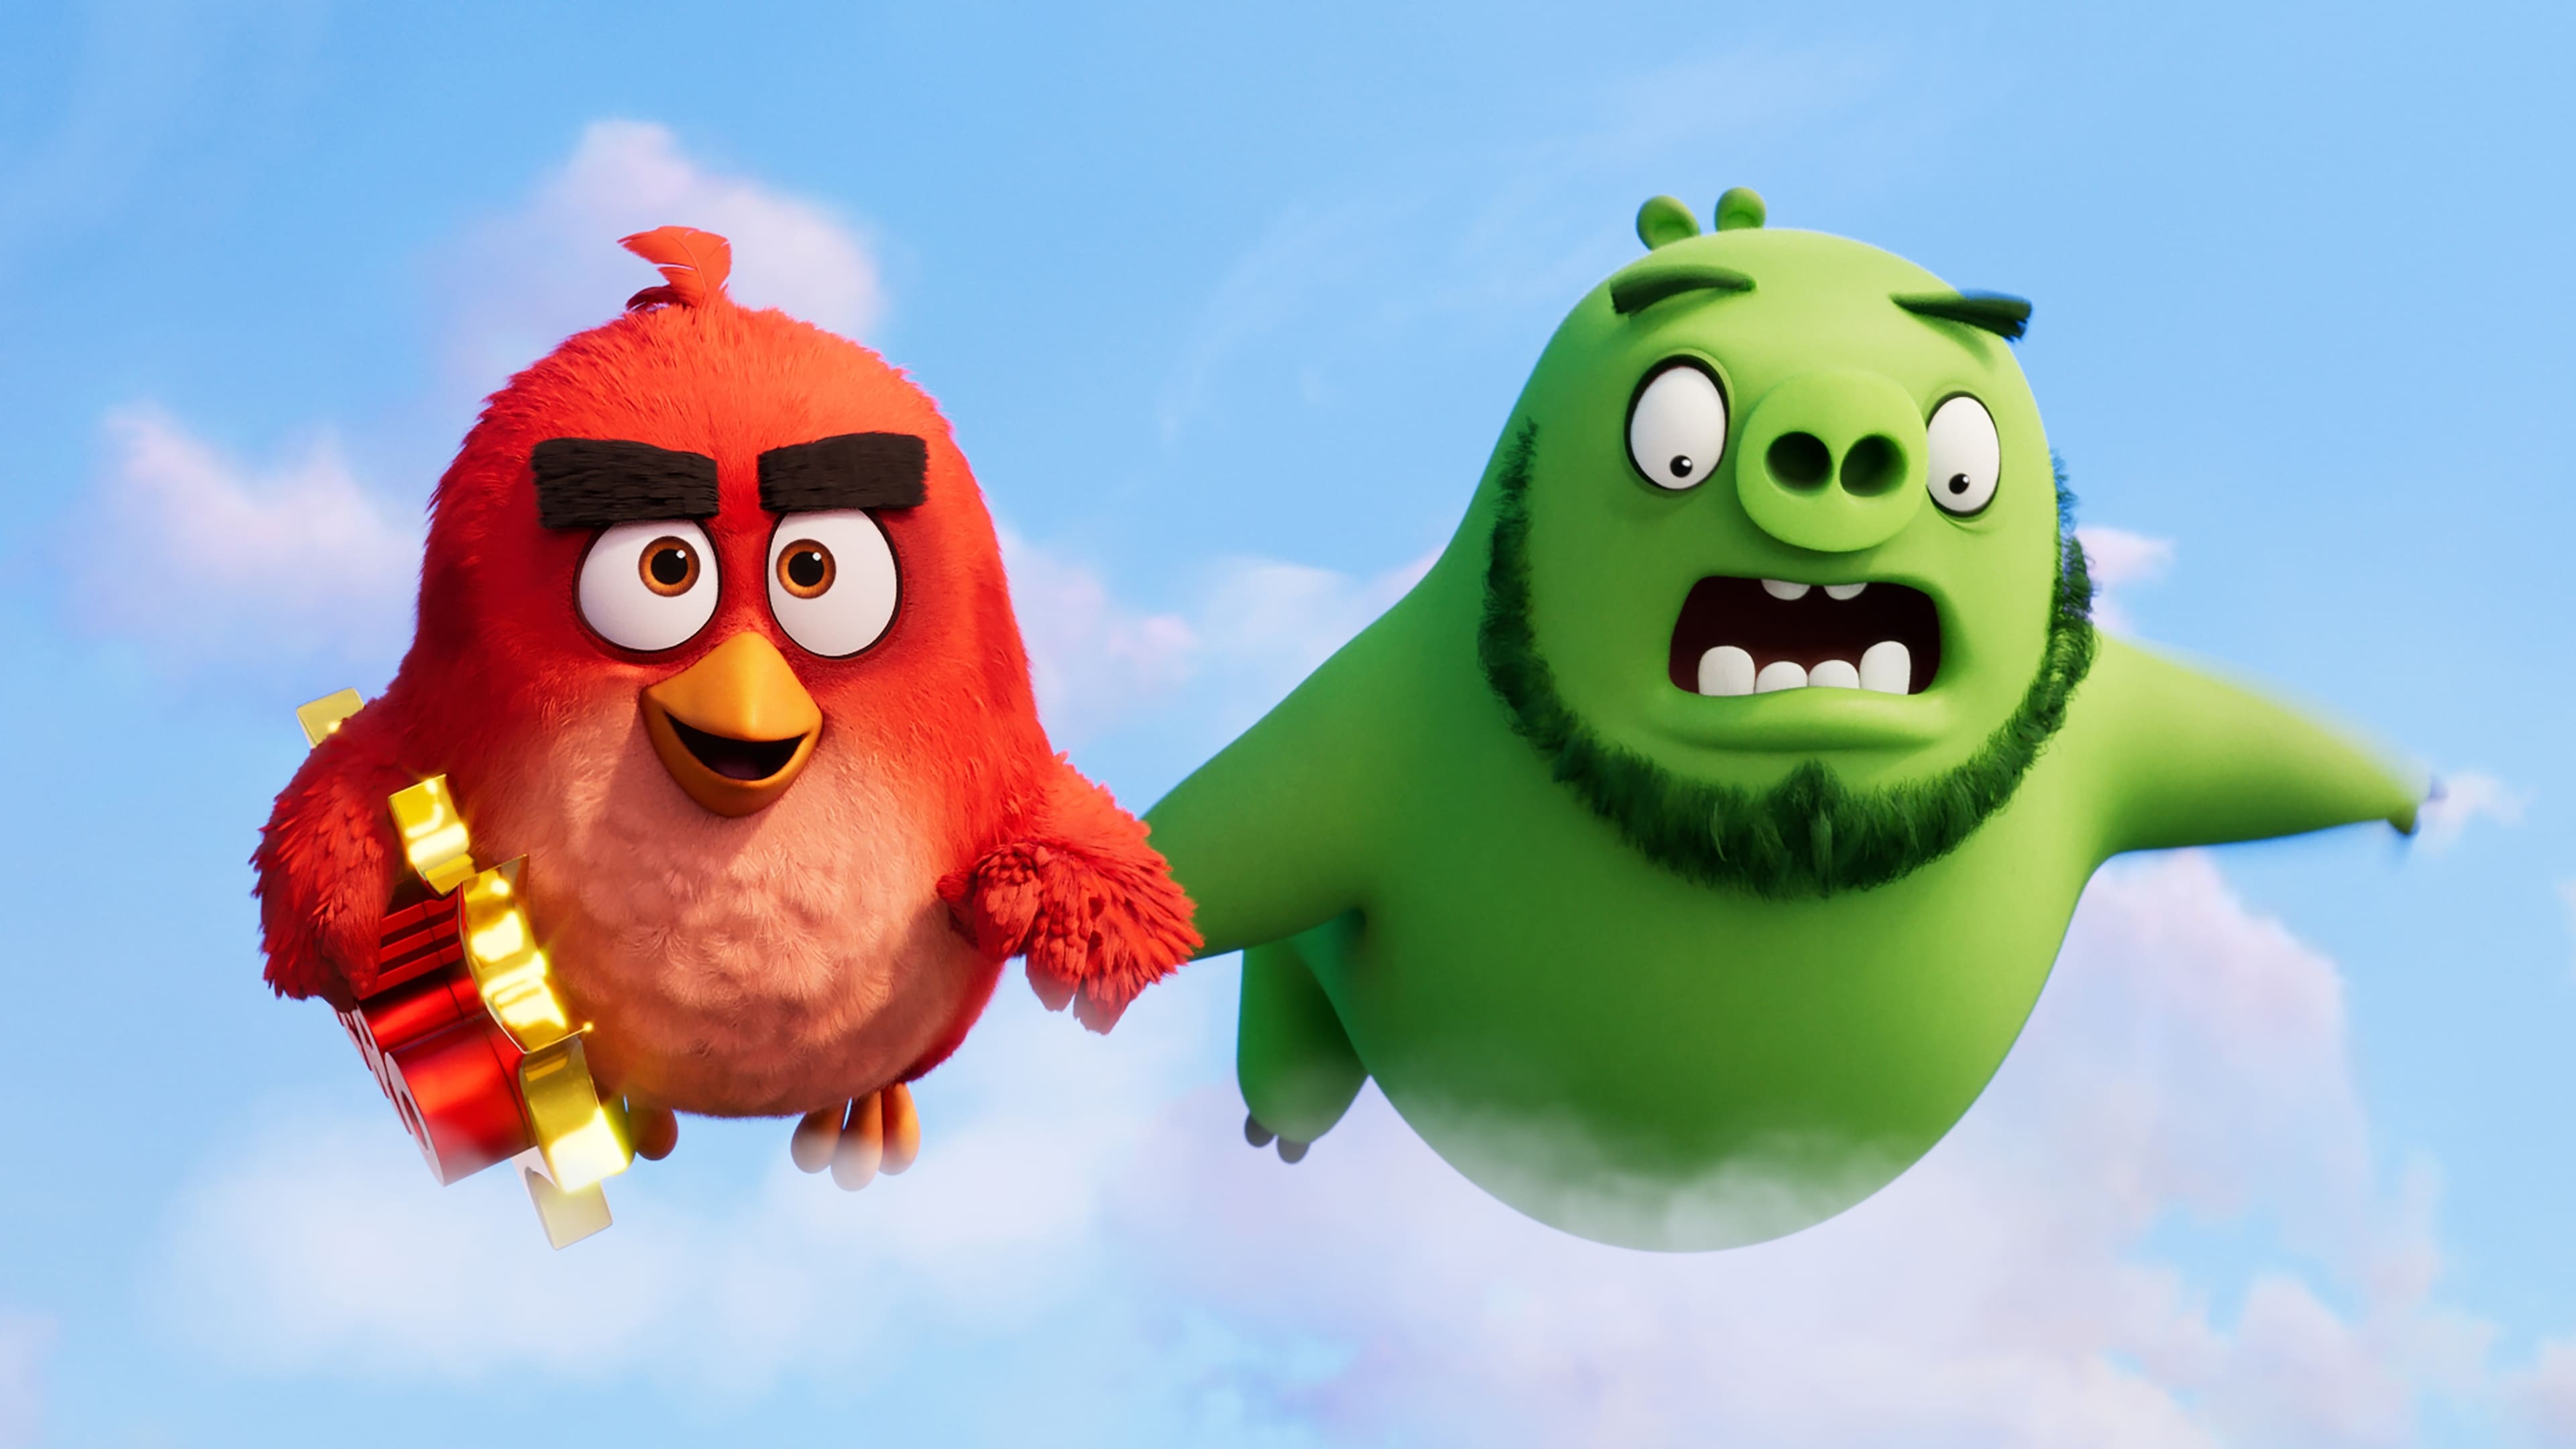 The Angry Birds Movie 2 4k Ultra HD Wallpaper. Background